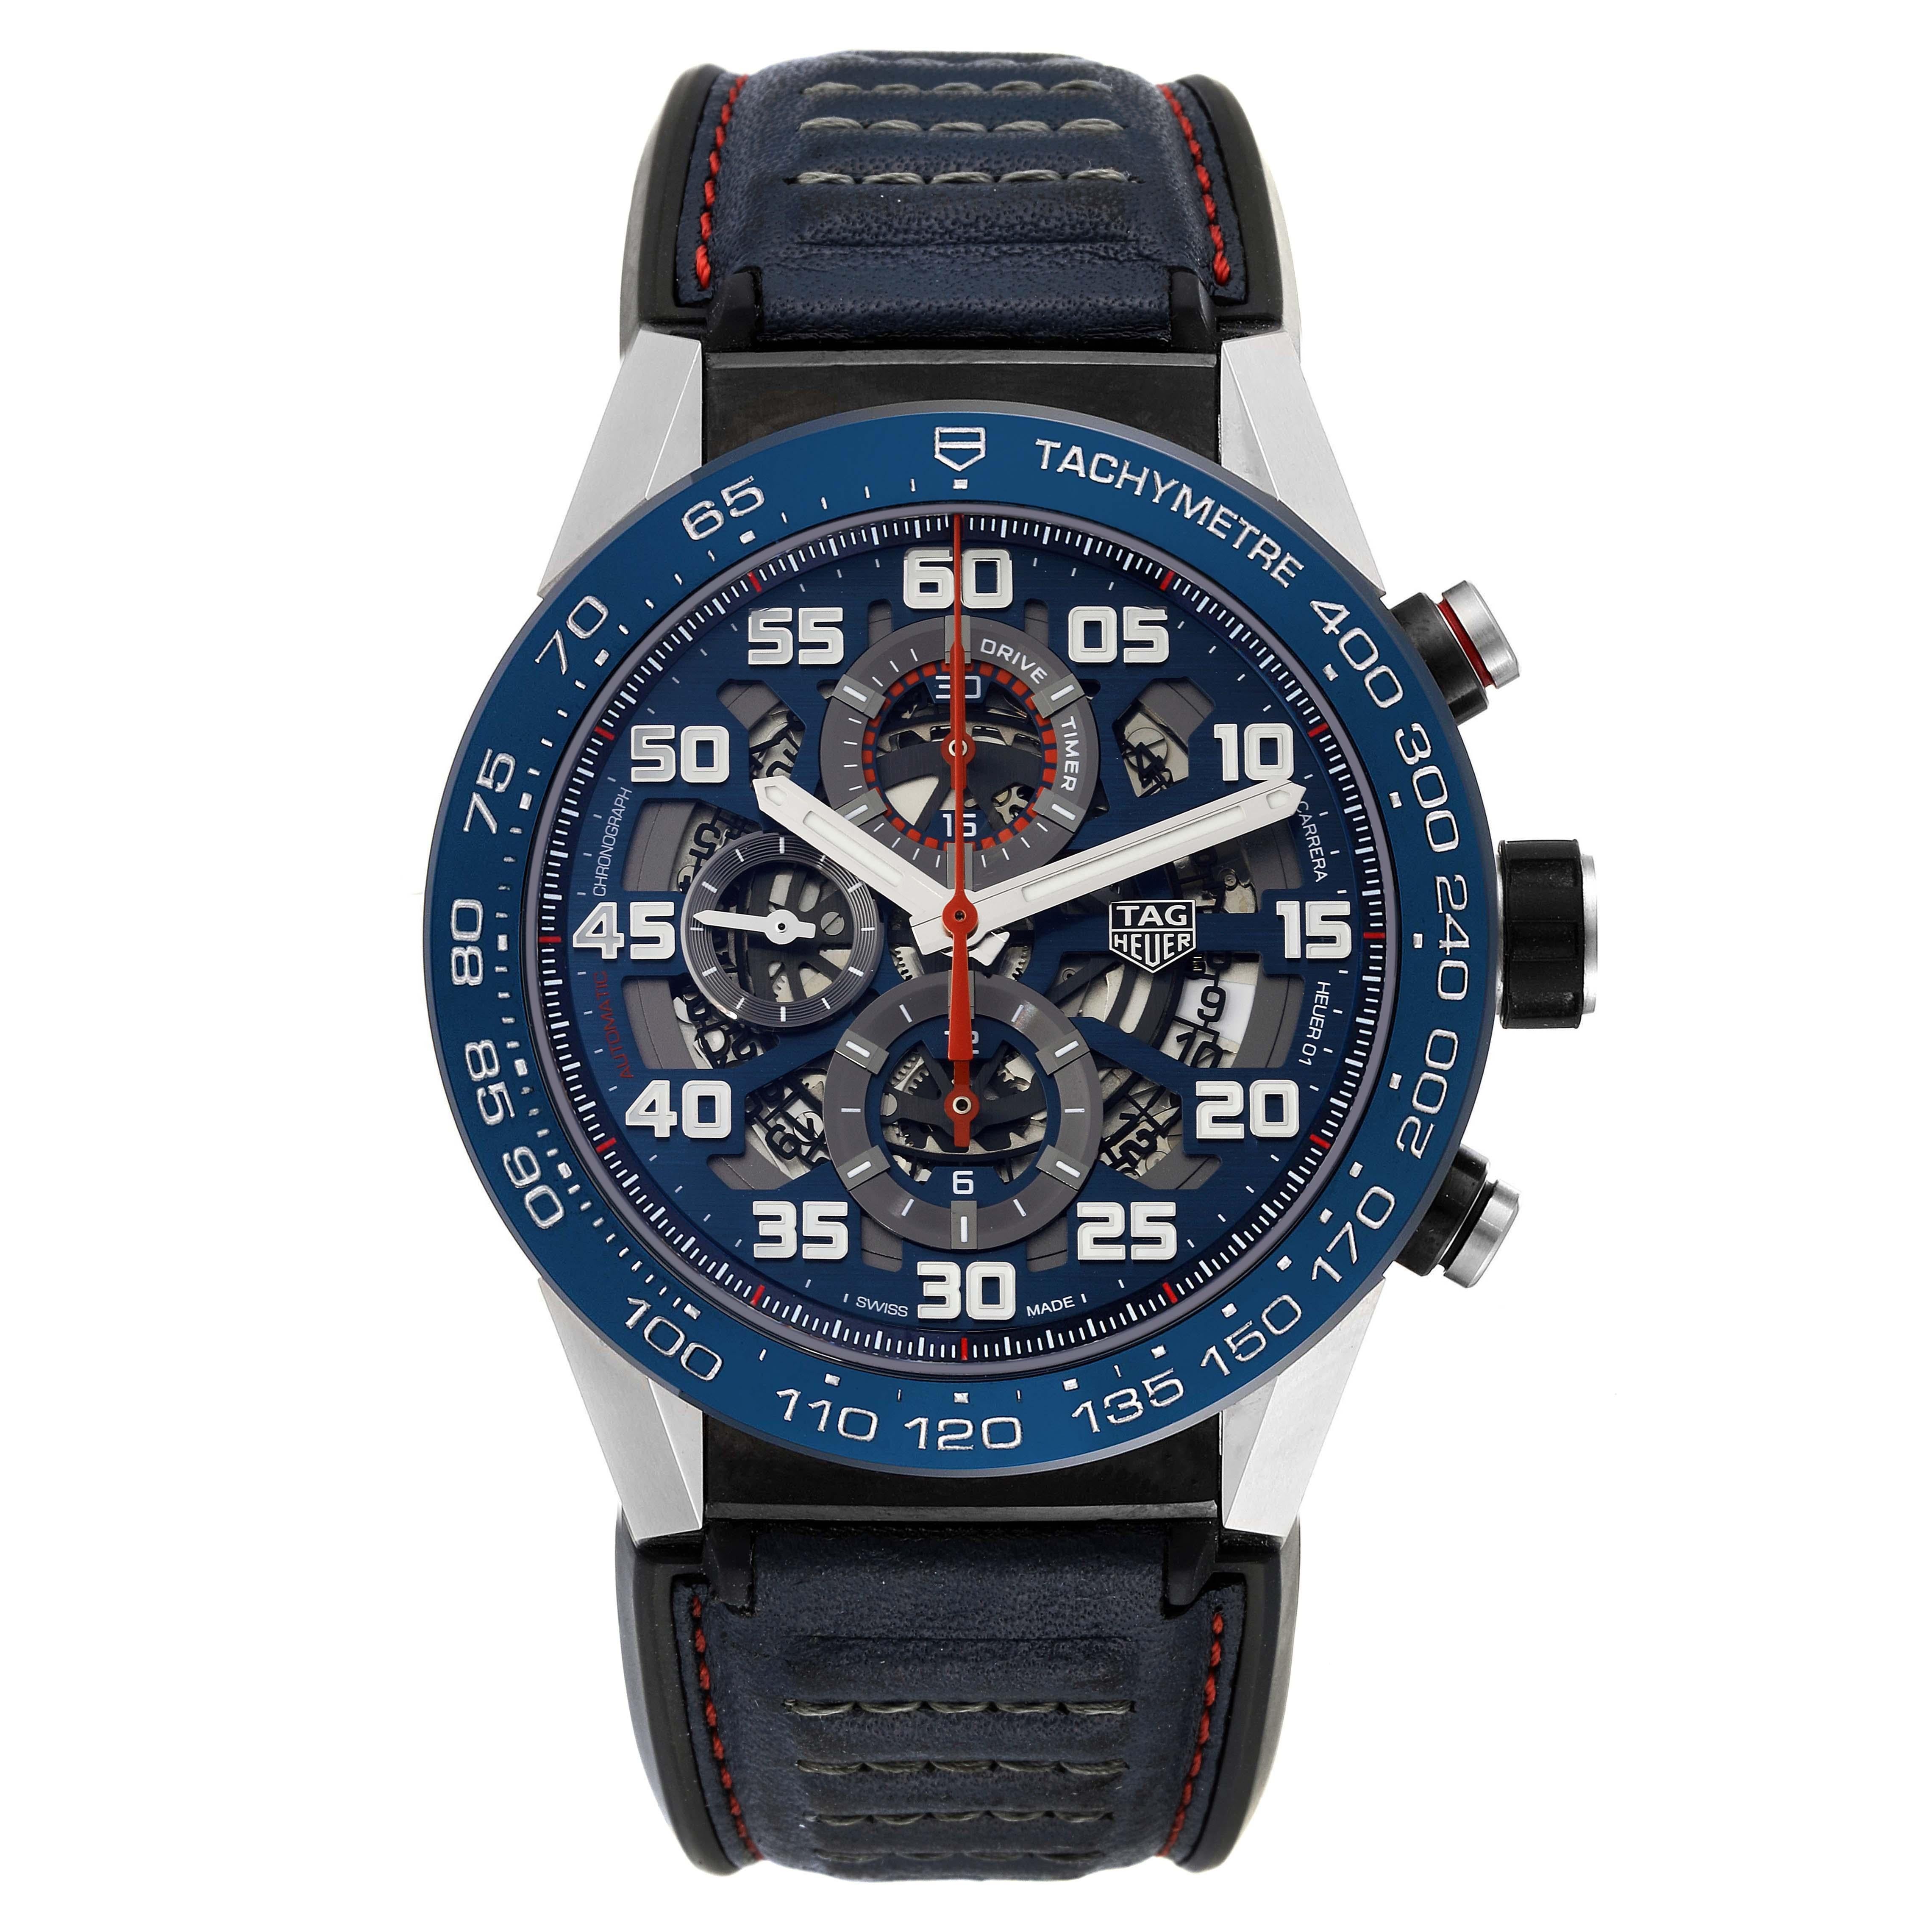 Tag Heuer Carrera Red Bull Racing Steel PVD Mens Watch CAR2A1N Box Card. Automatic self-winding chronograph movement. Stainless steel PVD case 45.0 mm. Exhibition transparent sapphire crystal caseback. Blue ceramic bezel with tachymeter scale.